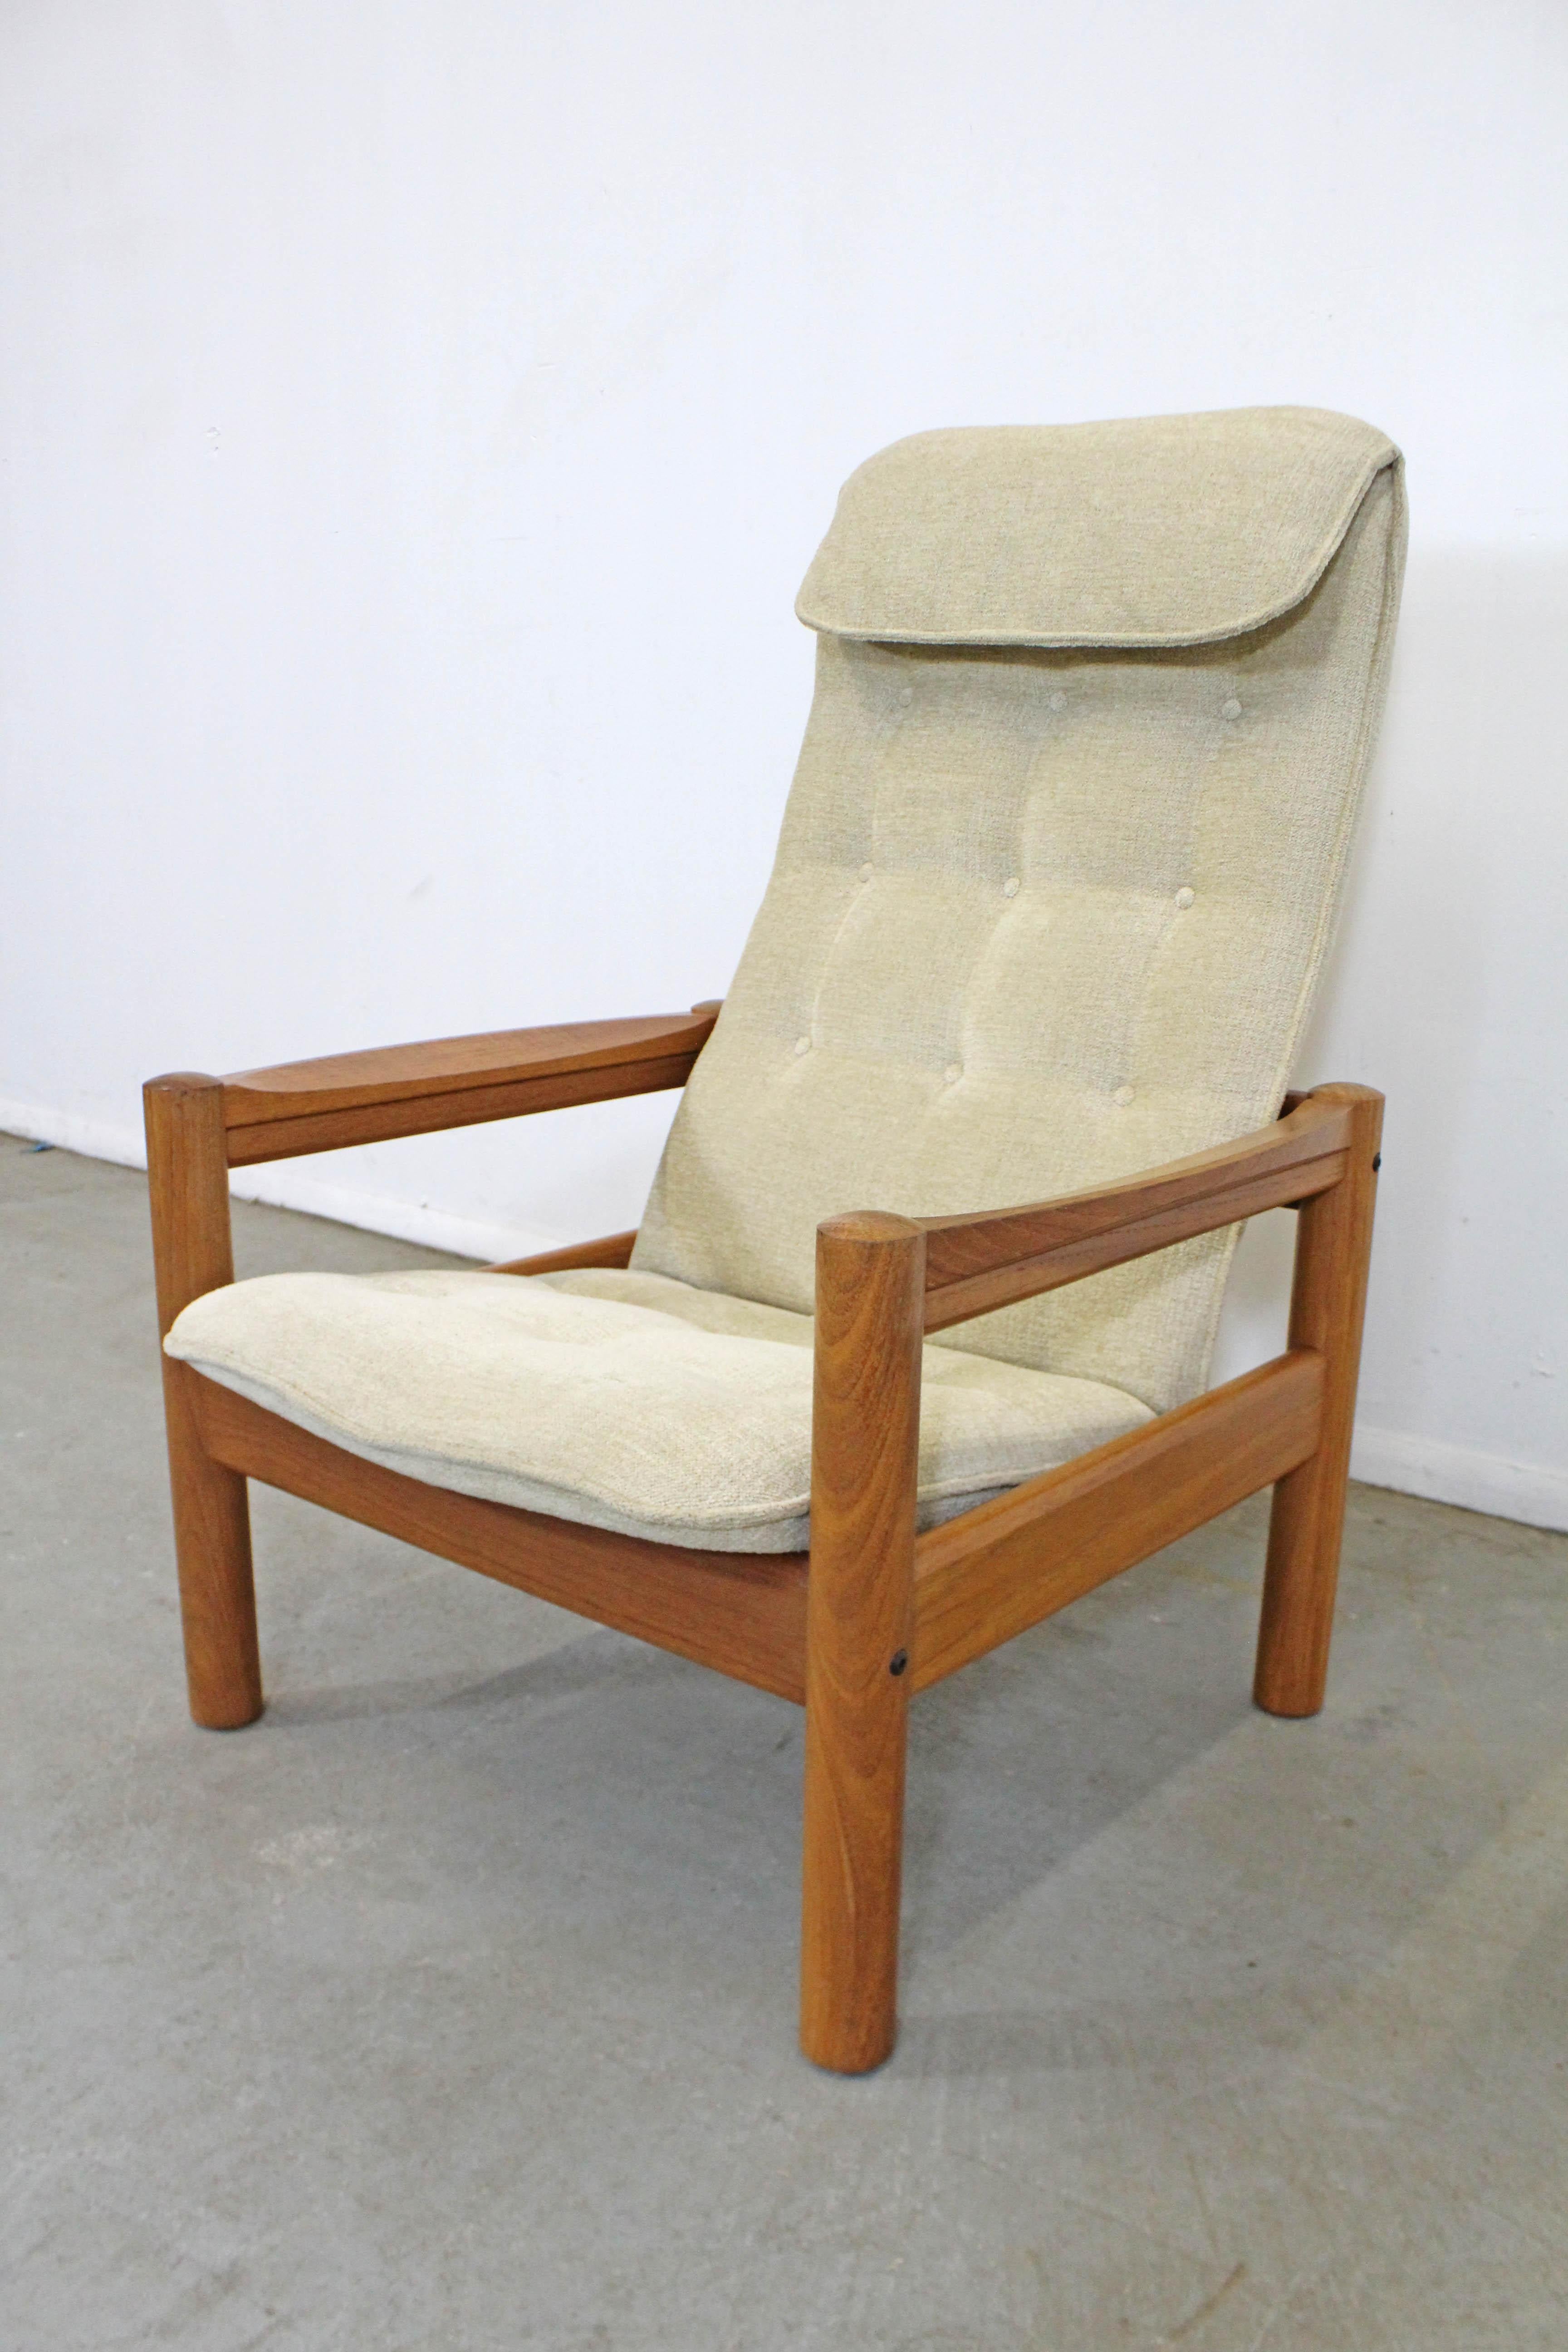 Offered is a vintage Danish modern teak lounge chair made by Domino Mobler. Has a highback with headrest in tufted upholstery and a solid teak frame. In good vintage condition, has minor surface wear/scratches. It is structurally sound. It is marked